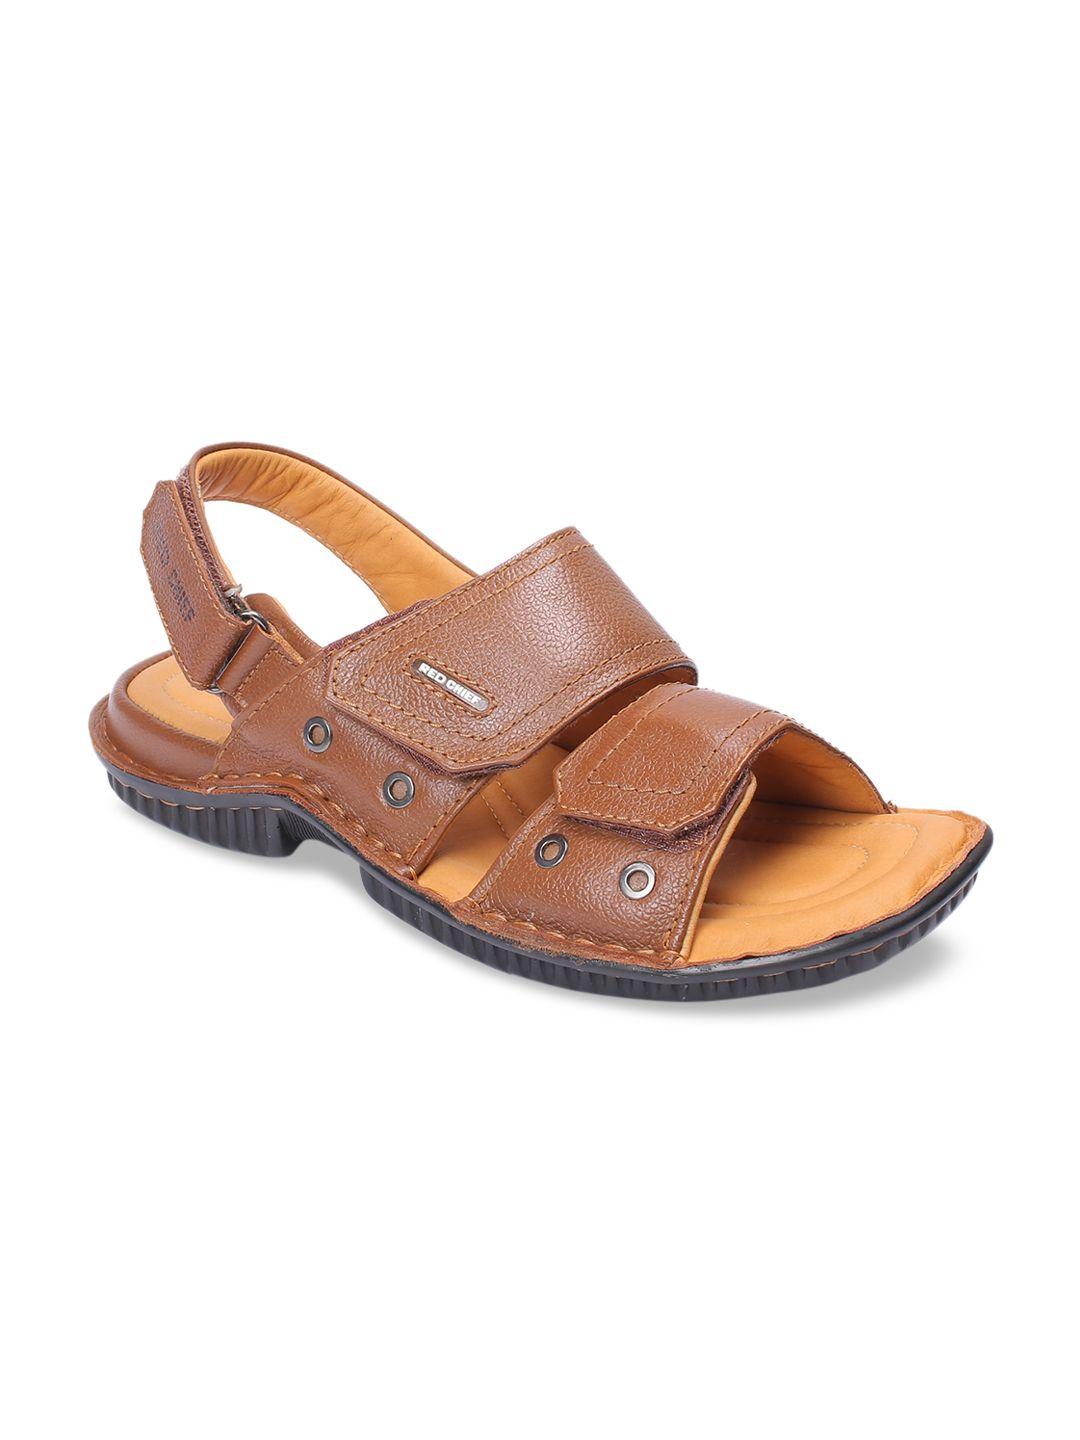 red-chief-men-tan-brown-leather-sandals